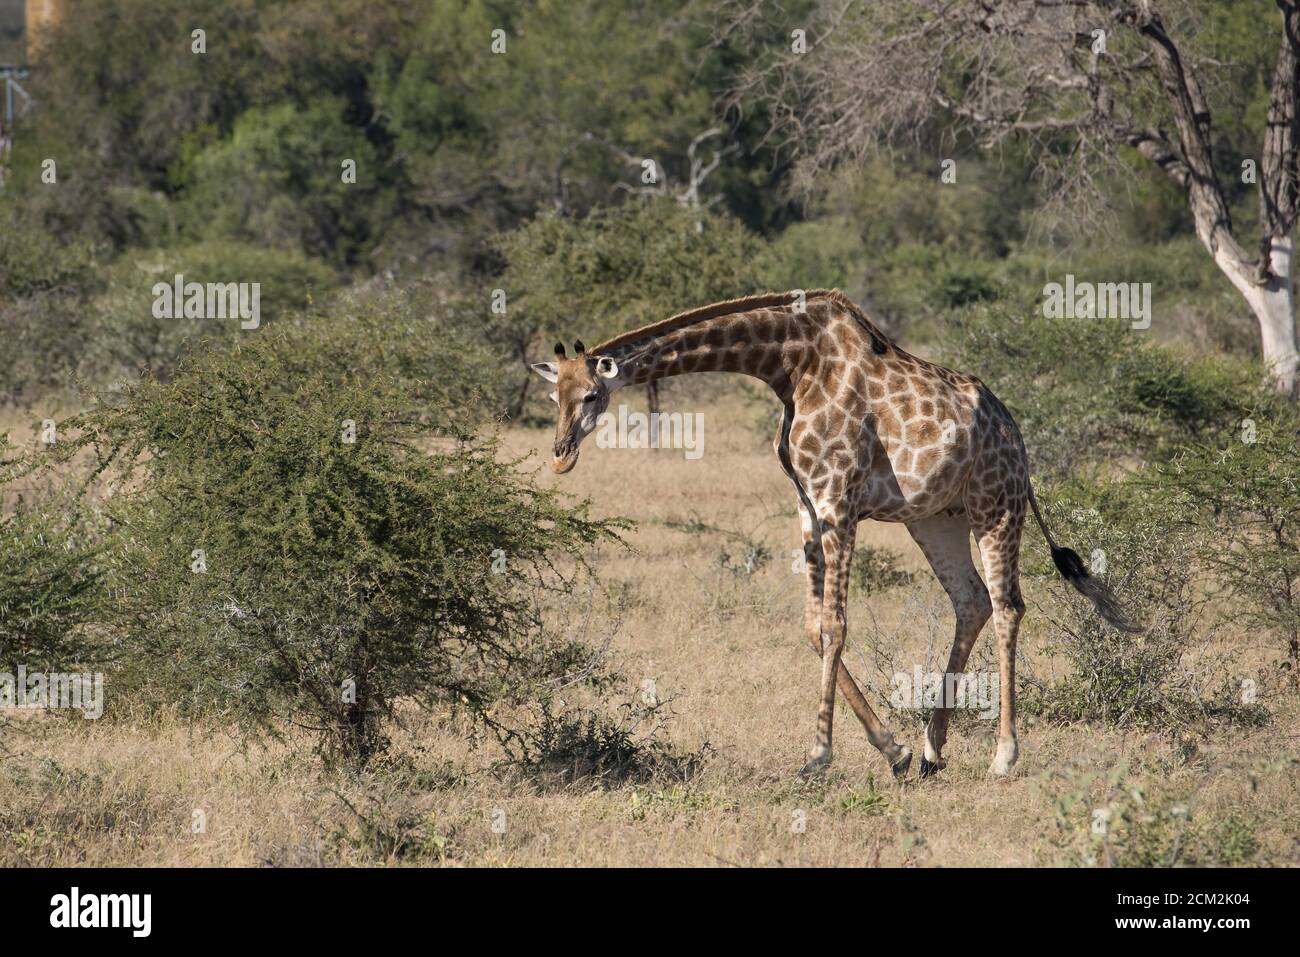 Young wild giraffe with head and neck downward walks along in the Greater Kruger wilderness. Horizontal landscape image. Stock Photo